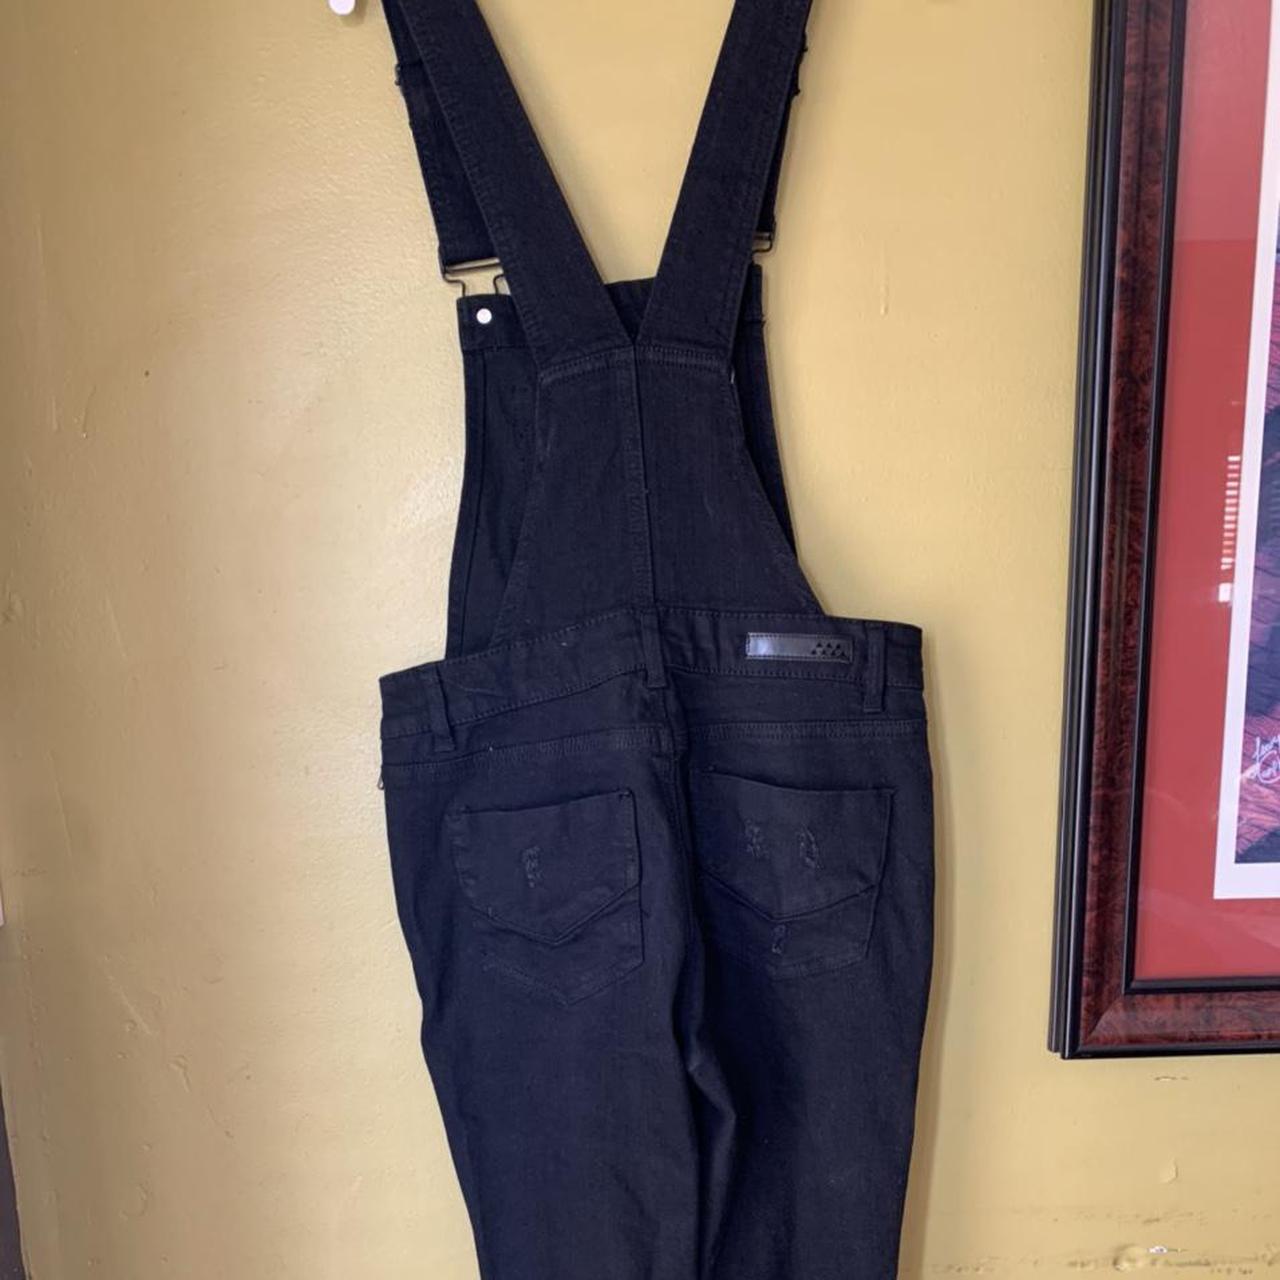 Product Image 2 - Dollhouse Black Overalls. 

Brand: Dollhouse

#Blackoveralls